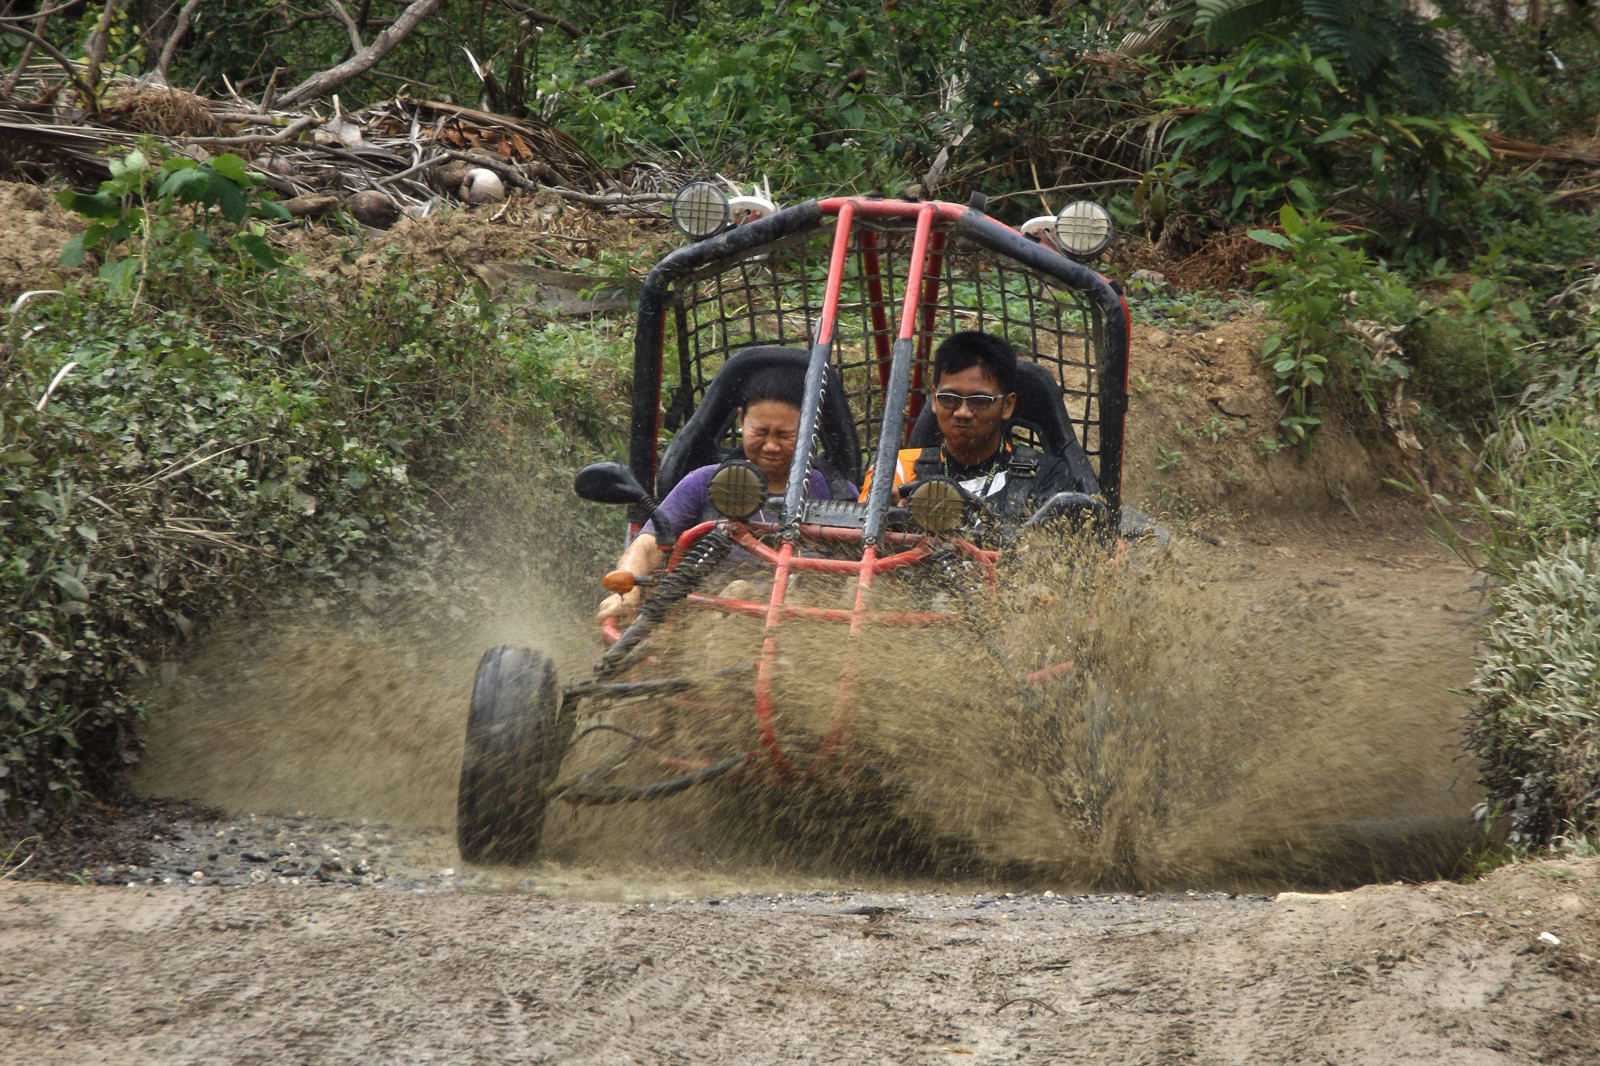 Mud Kart in off-road track of Extreme Sports Philippines Adventure Park in Puerto Galera